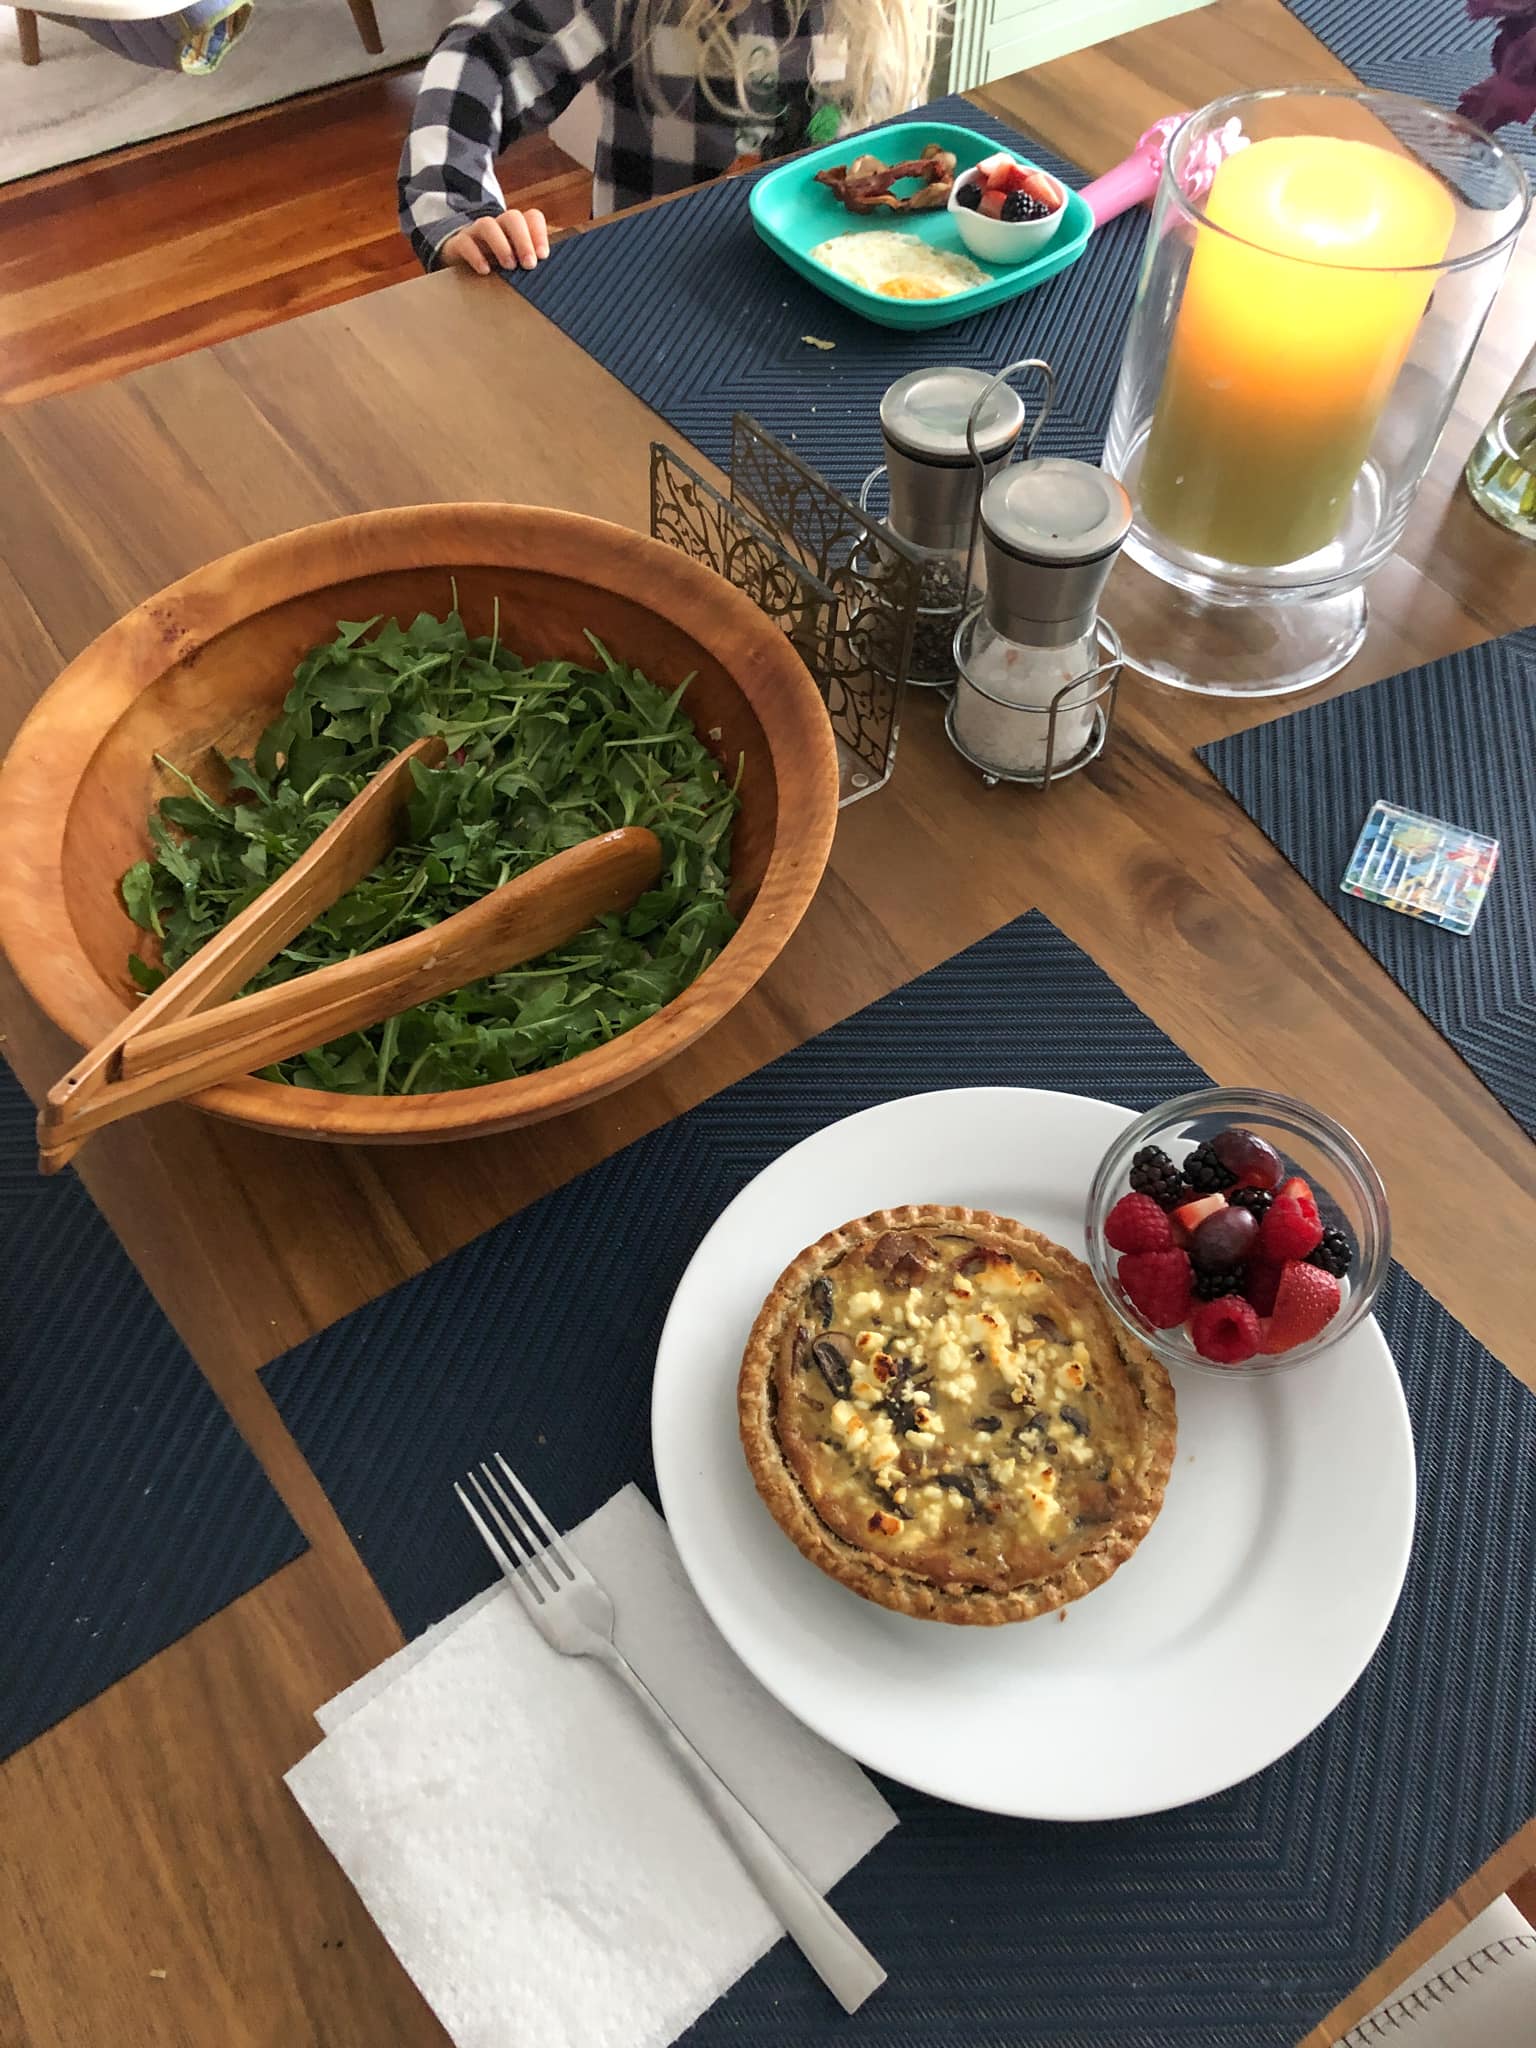 mother's day quiche and salad with berries